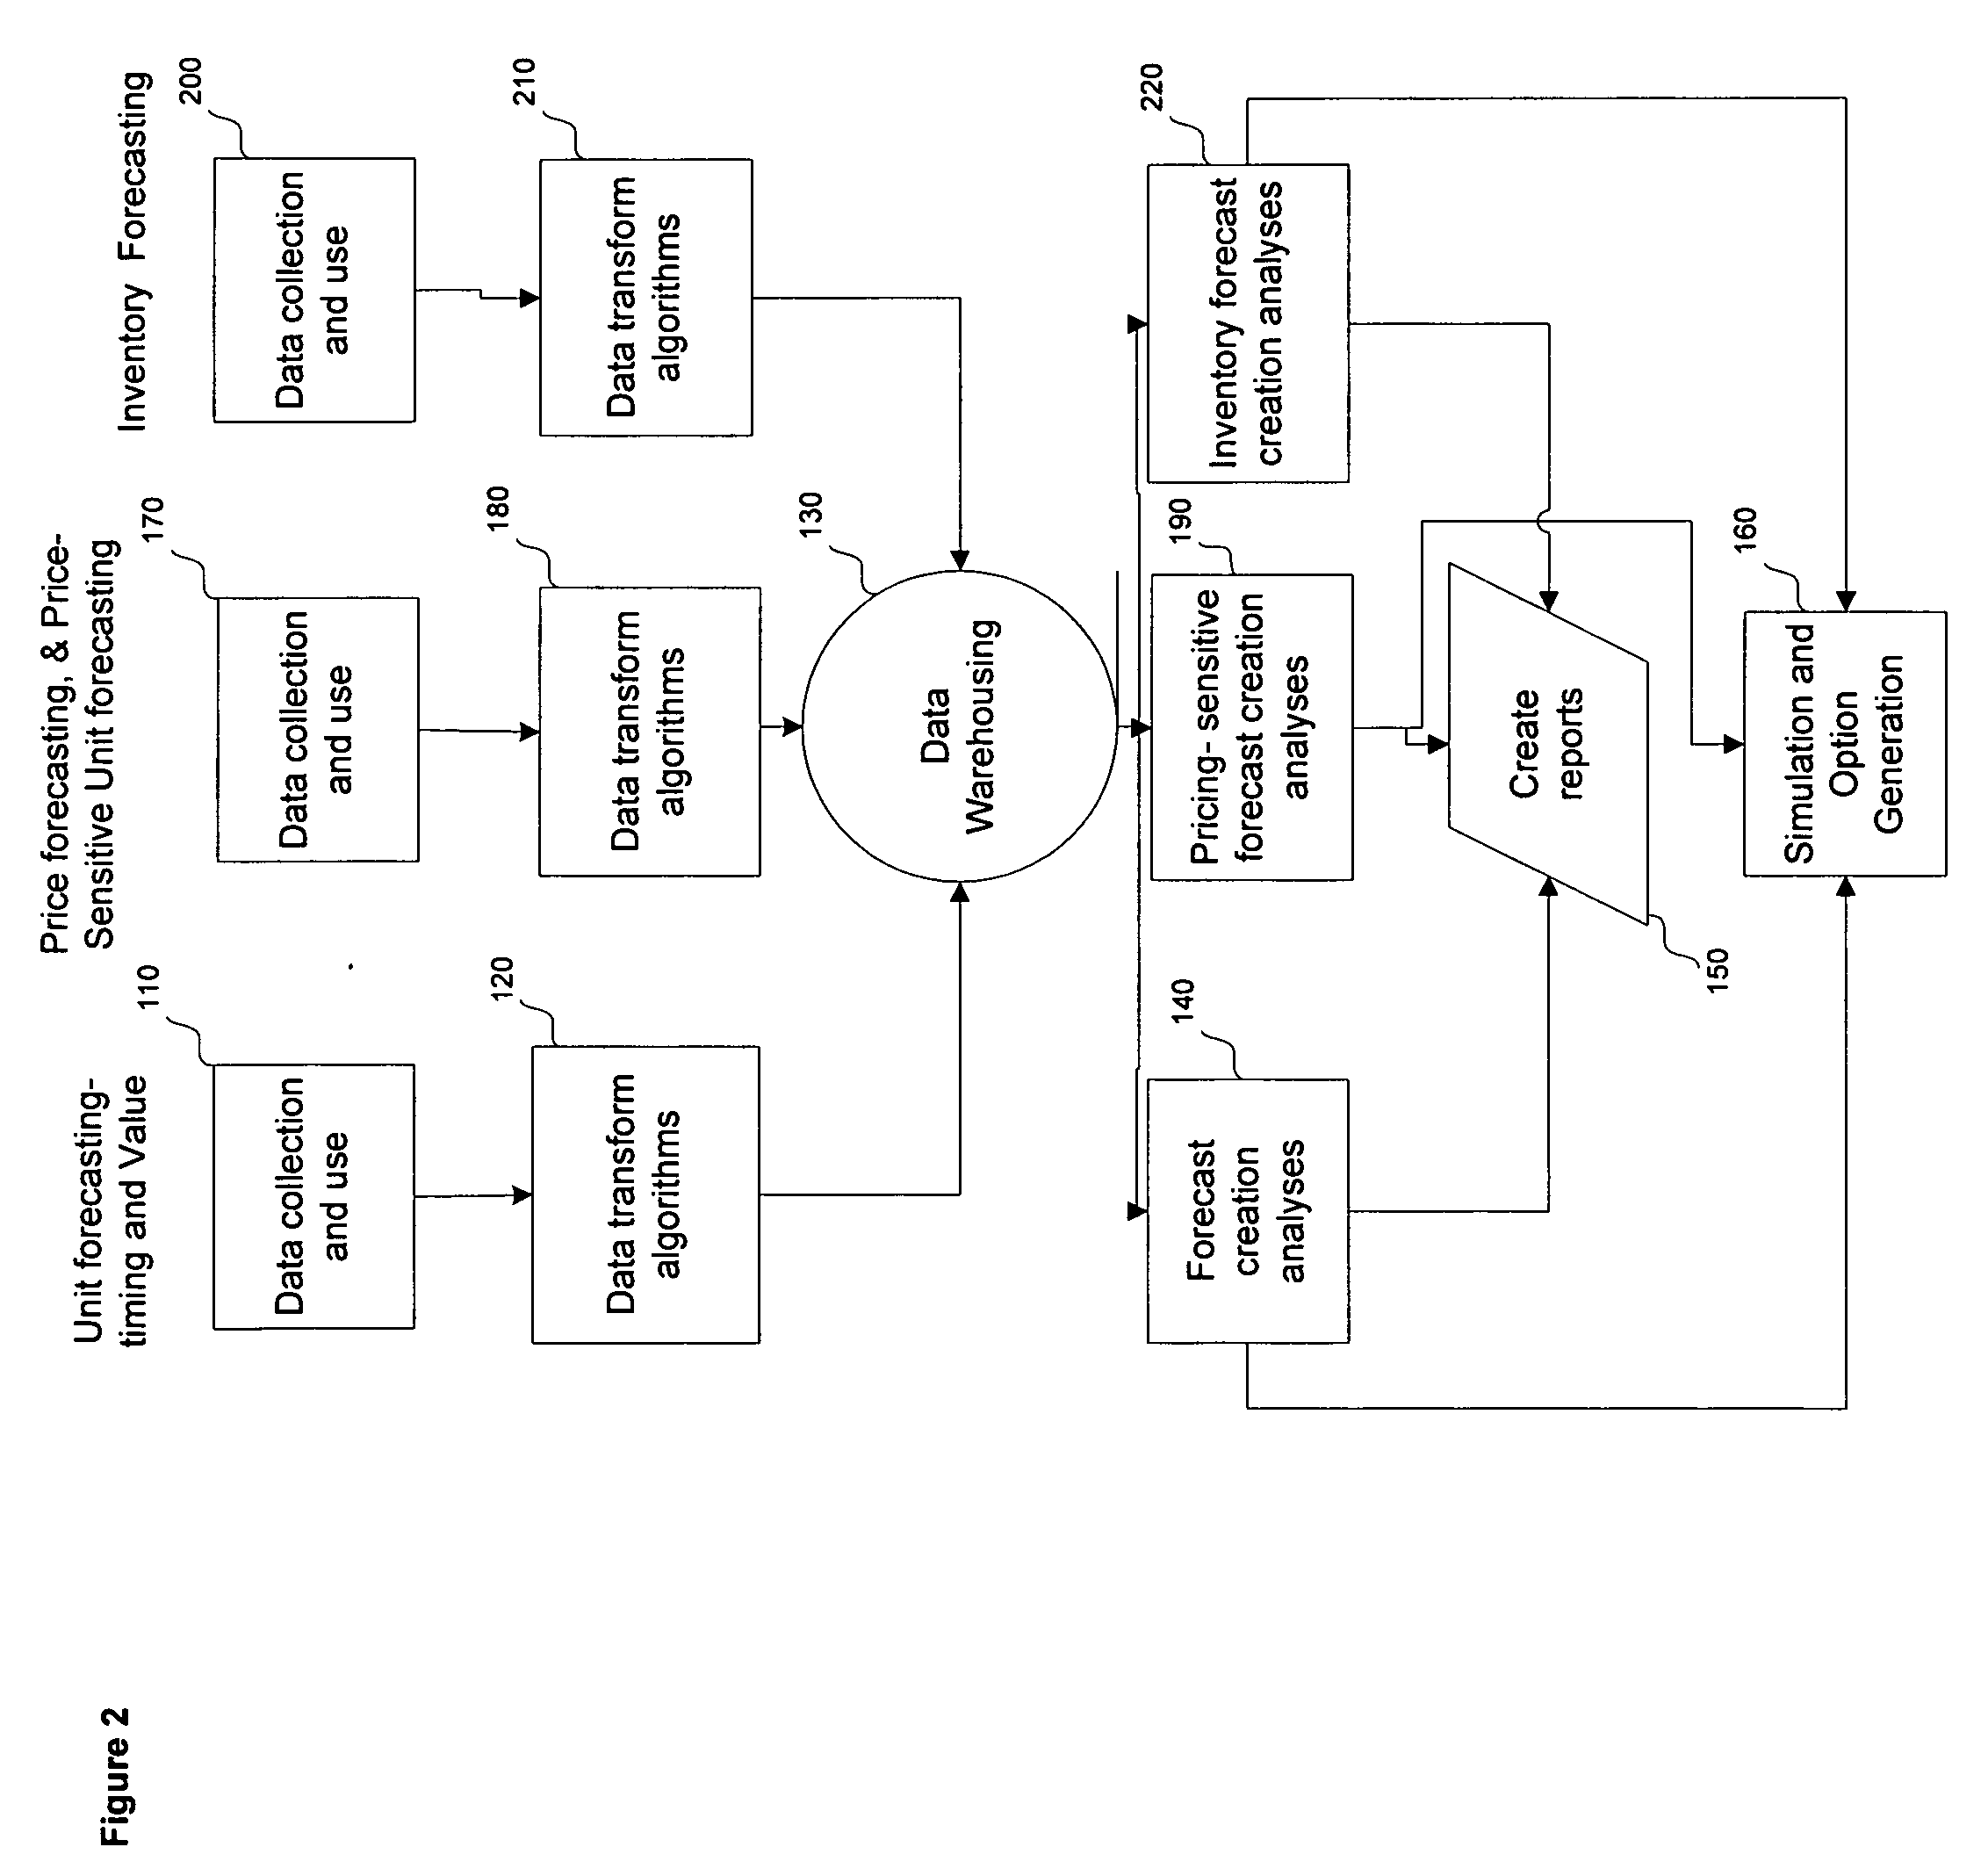 System, method, and software for short term forecasting using predictive indicators